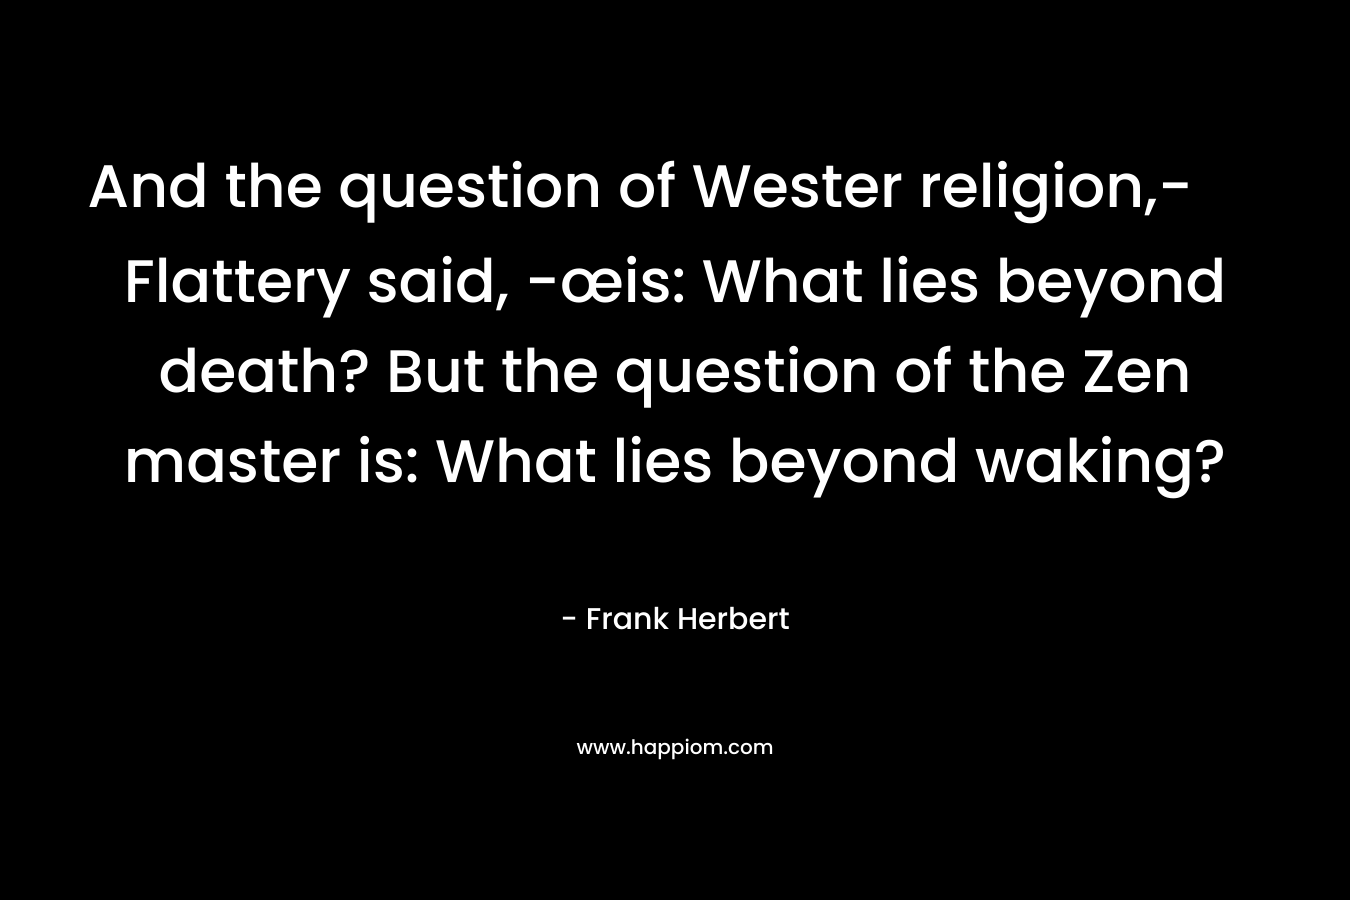 And the question of Wester religion,- Flattery said, -œis: What lies beyond death? But the question of the Zen master is: What lies beyond waking?